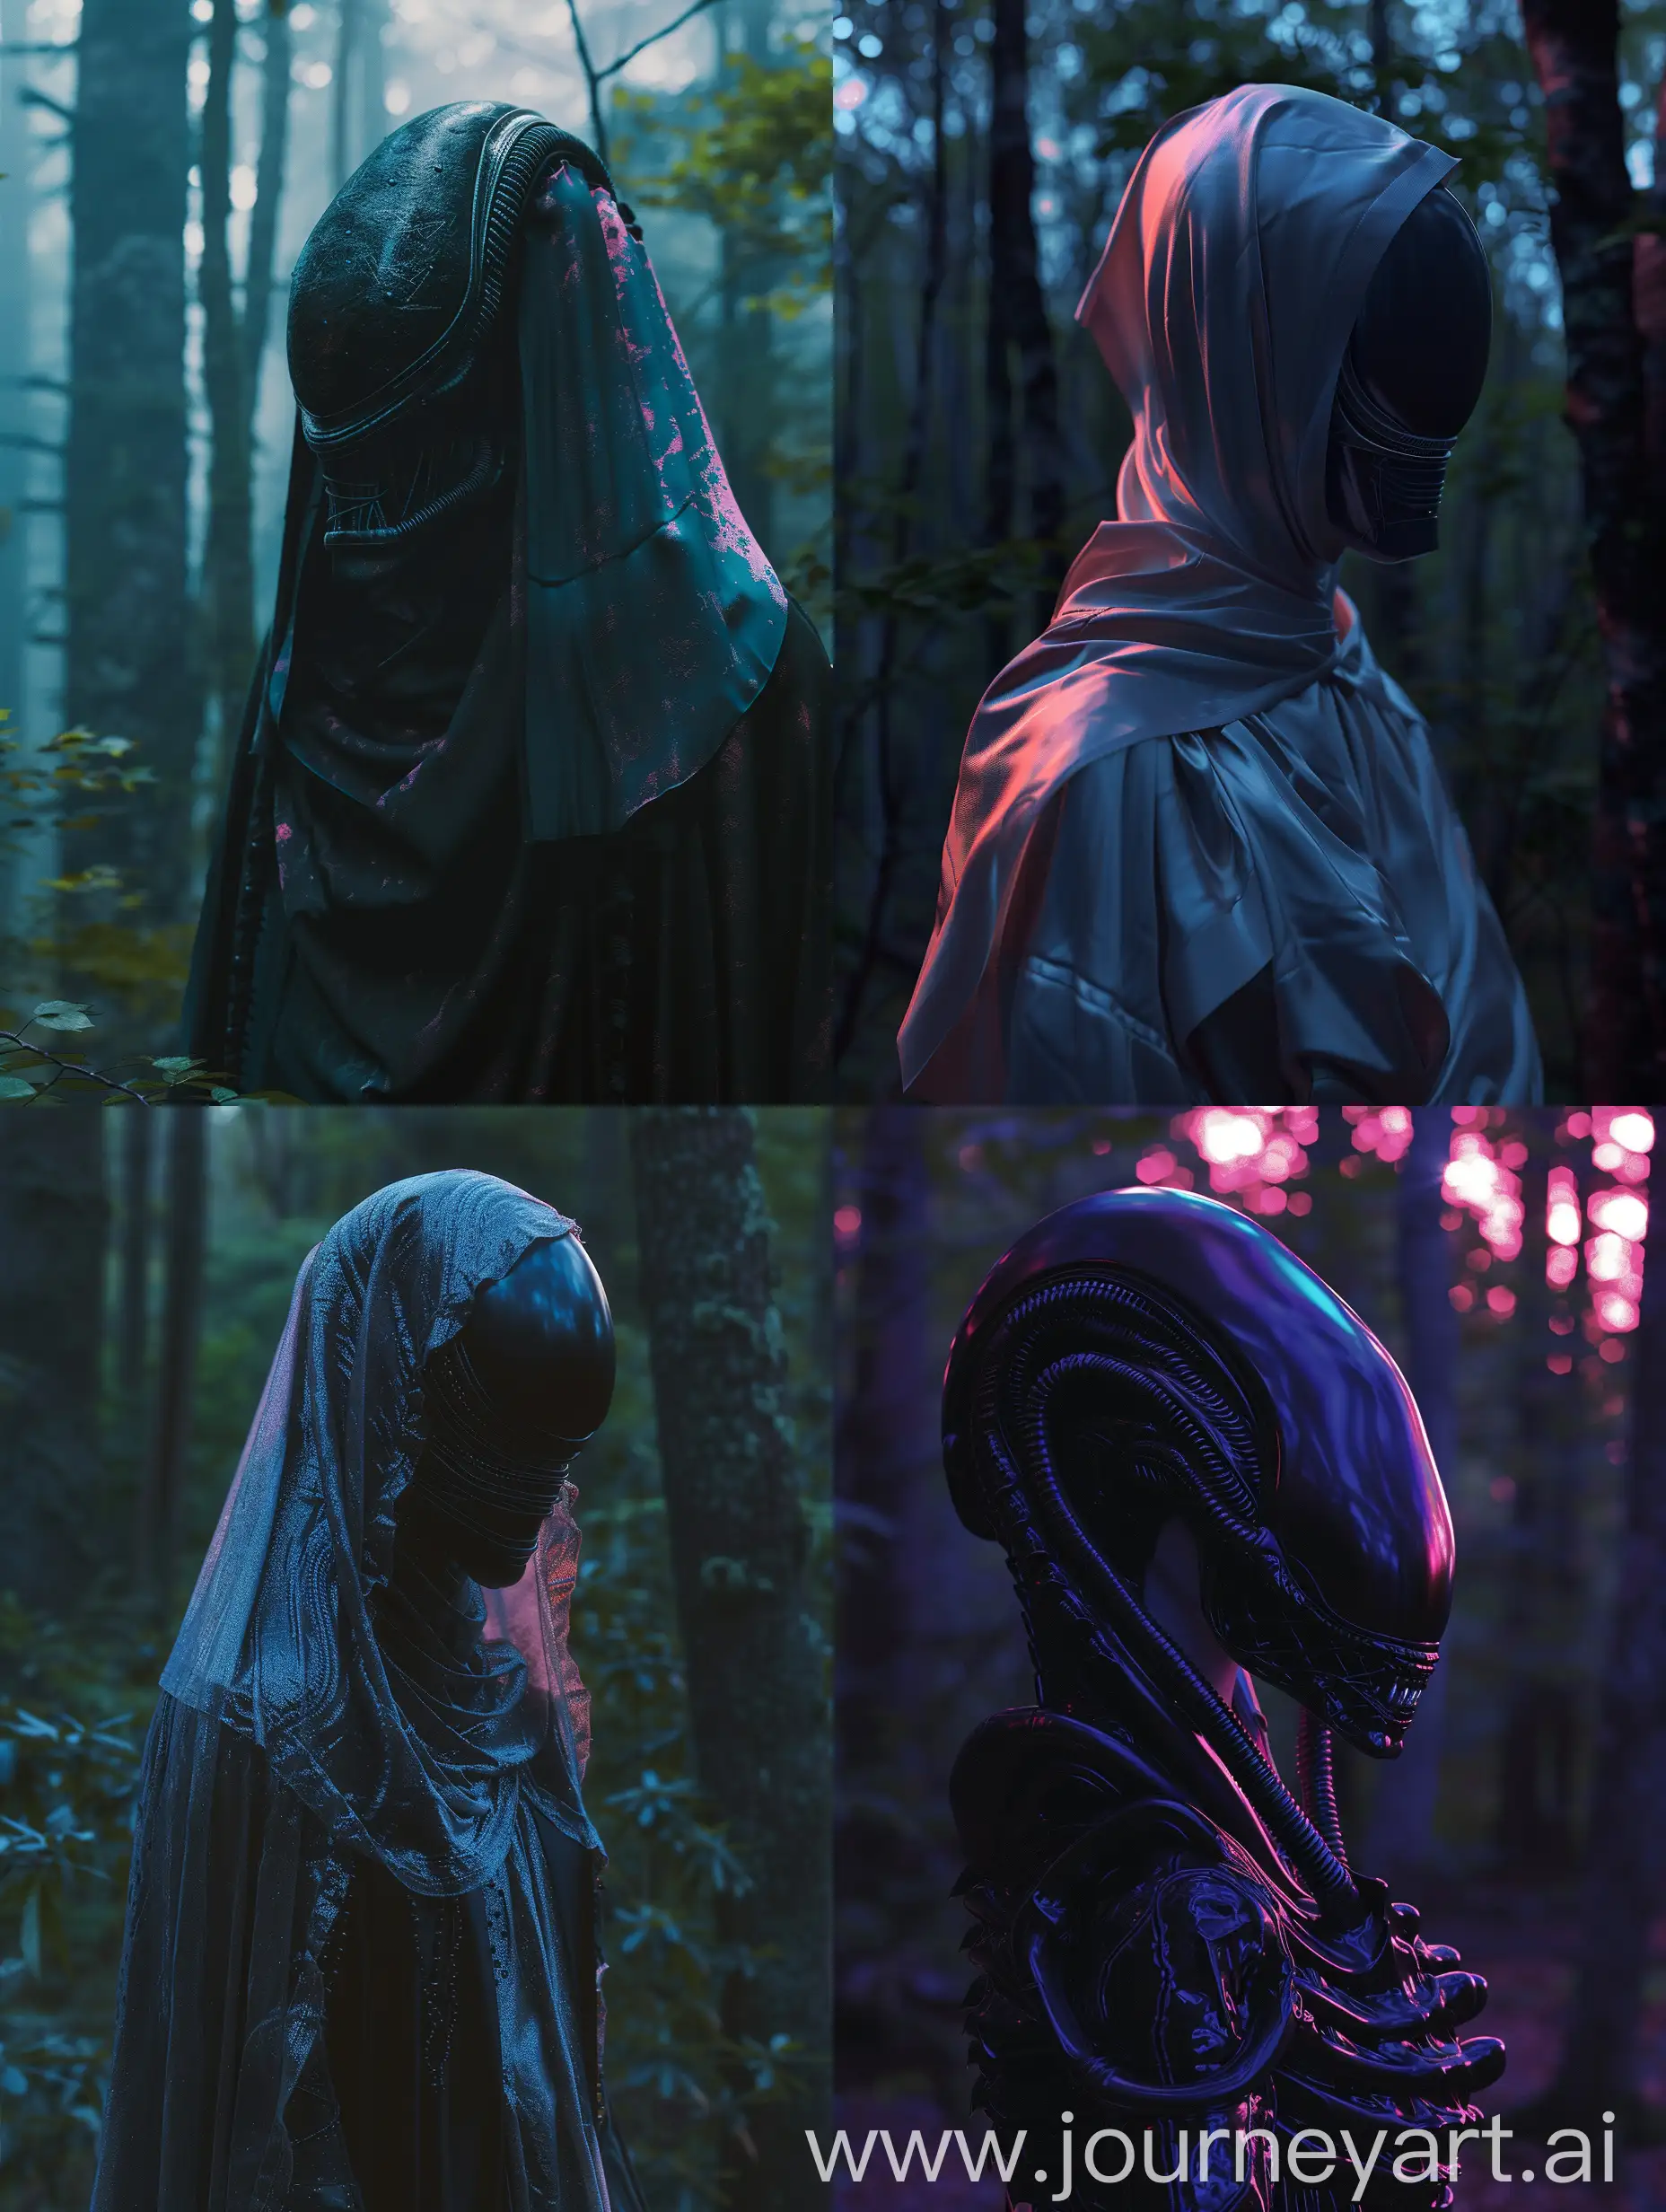 Macabre, xenomorph, darkness, close up potrait, realistic, high detailed, with subtle pink and blue gradients, Moonlight enveloping attire in forest